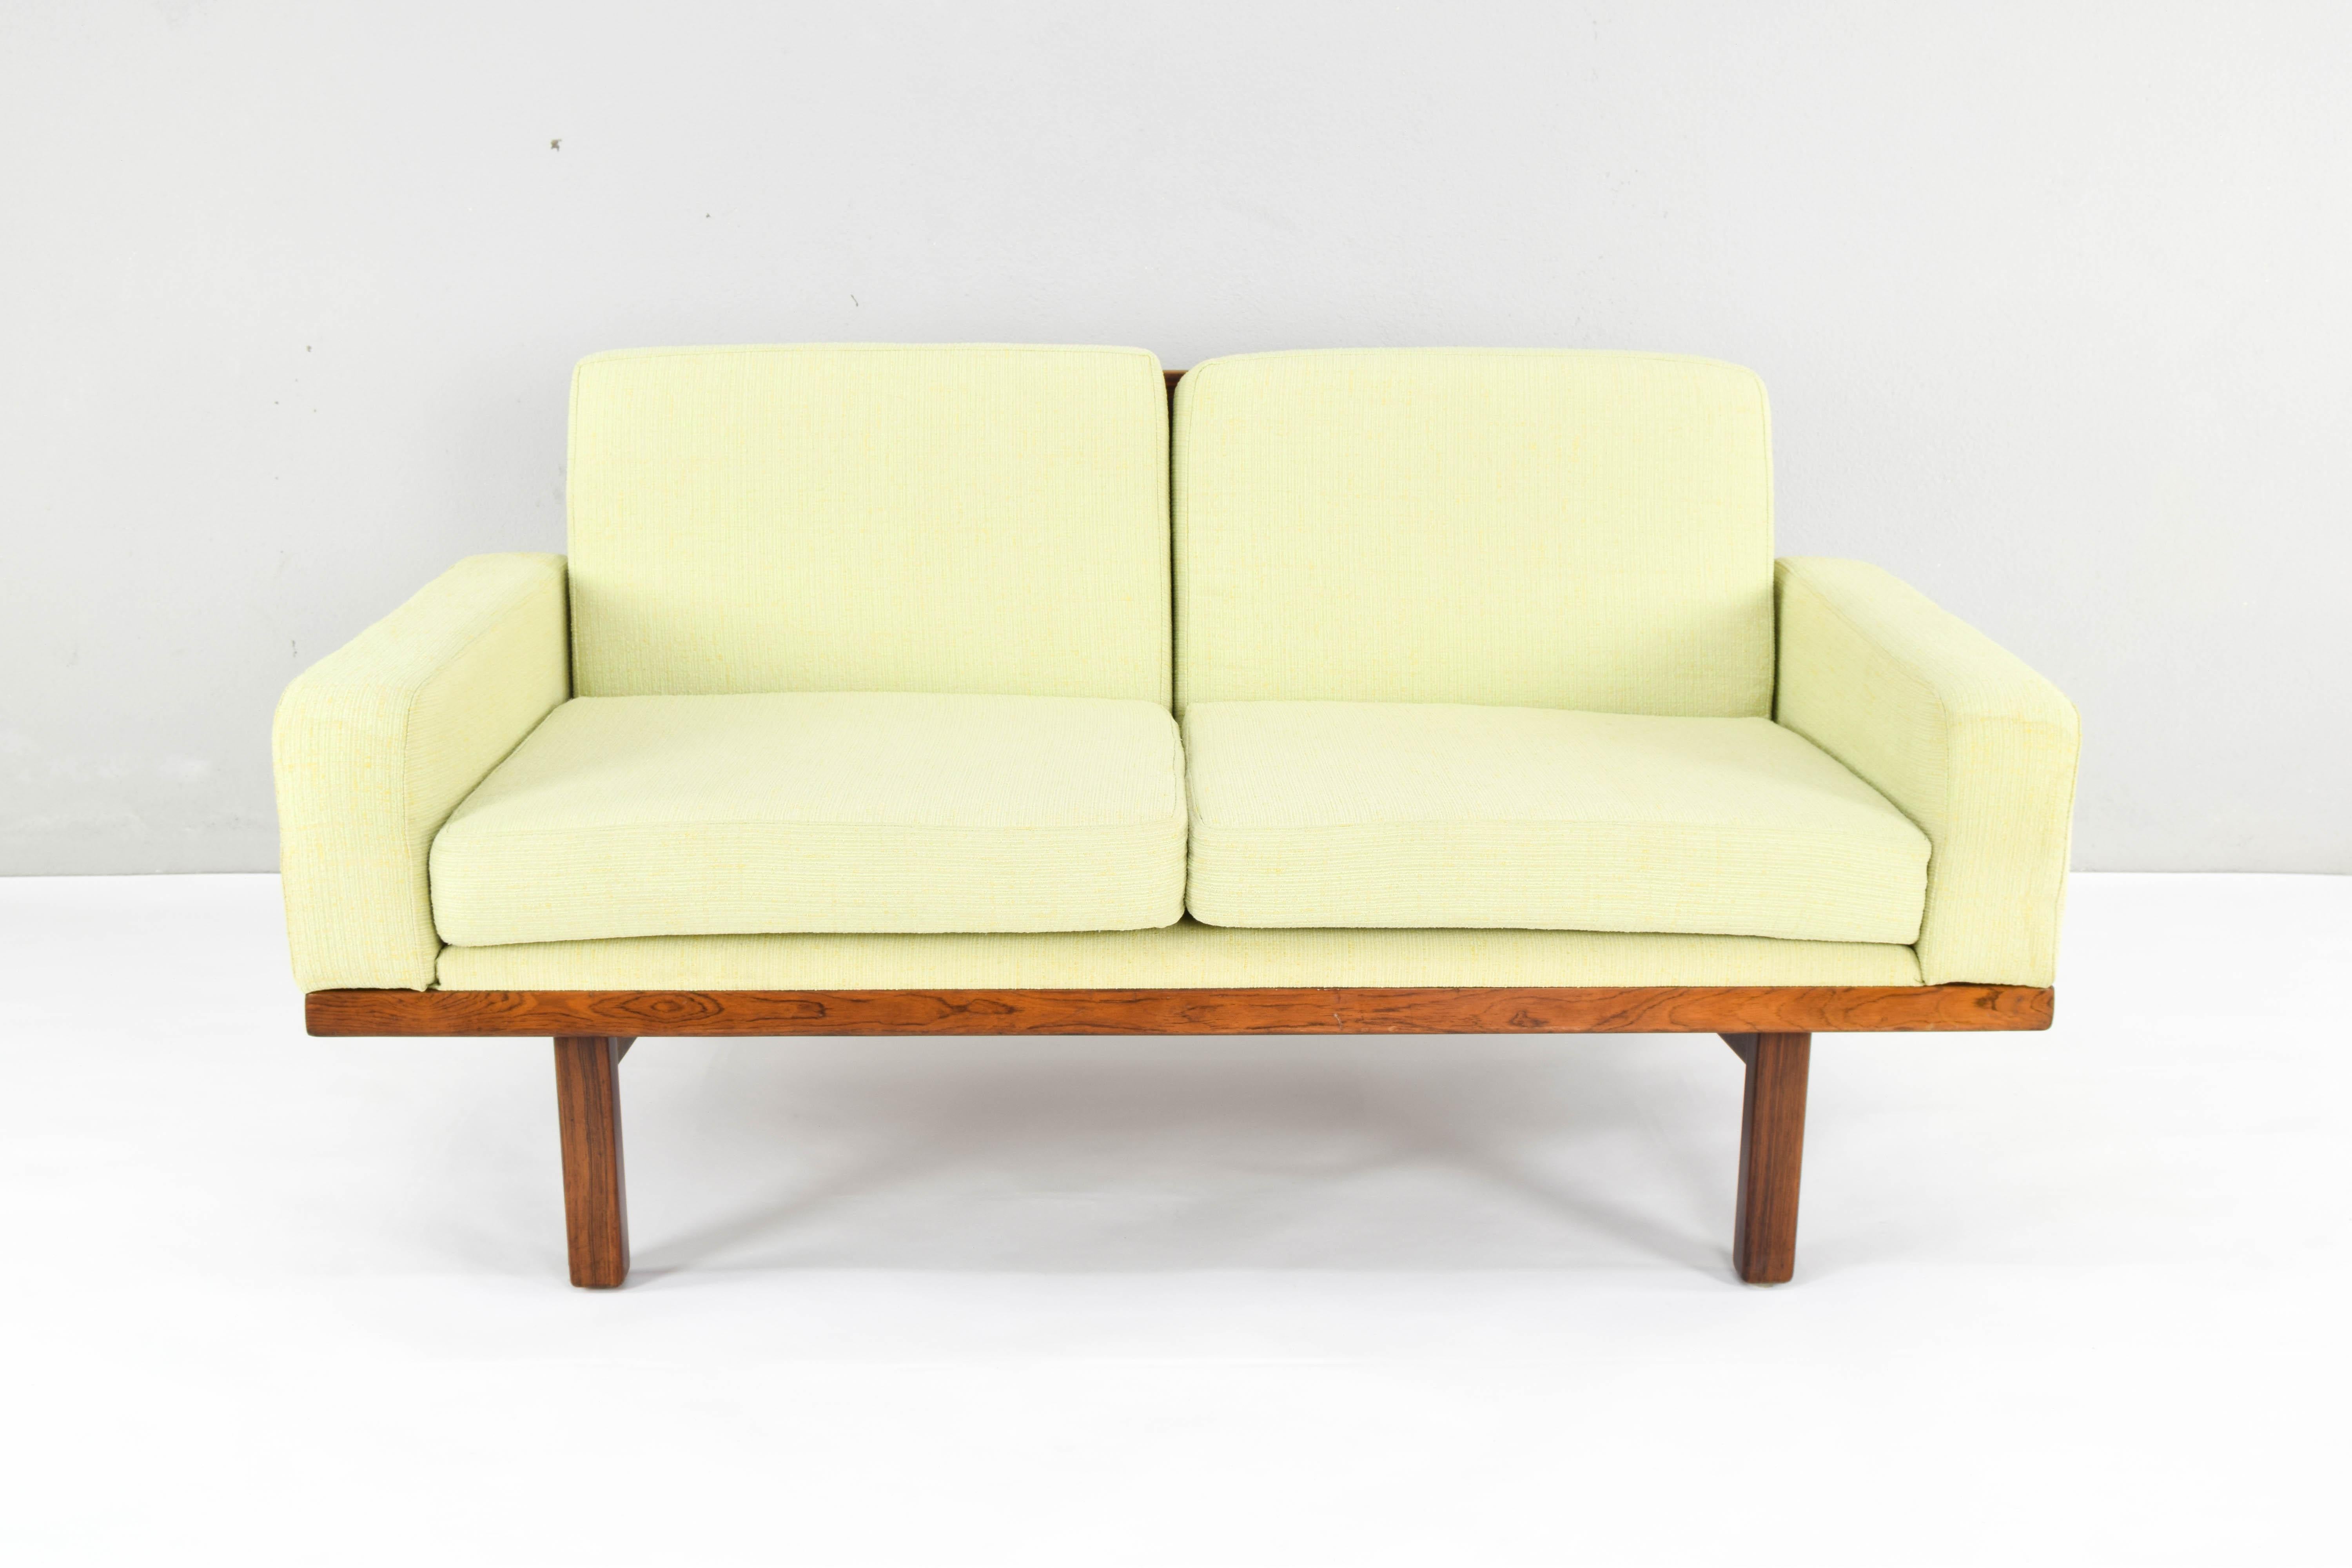 Two-seater sofa designed by Eric Merthen and manufactured by the IRE Möbler firm in Skillingaryd, Sweden, in the 1960s.
The loverseats edition of this model is extremely hard to come by.
Piece in very good condition.
At some point it was